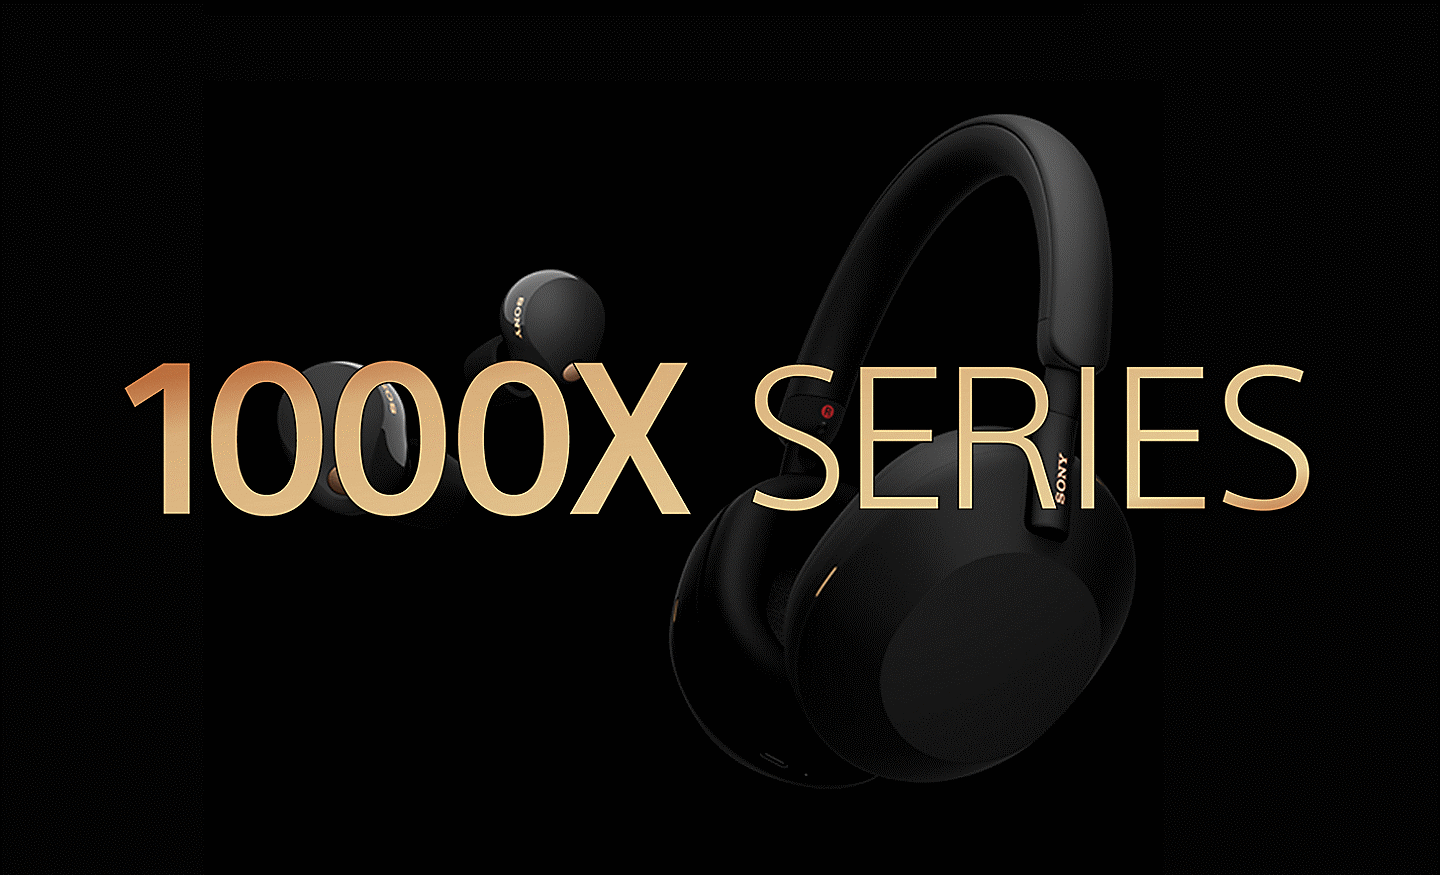 Image of two sets of Sony headphones on a black background with gold 1000X SERIES text in-front